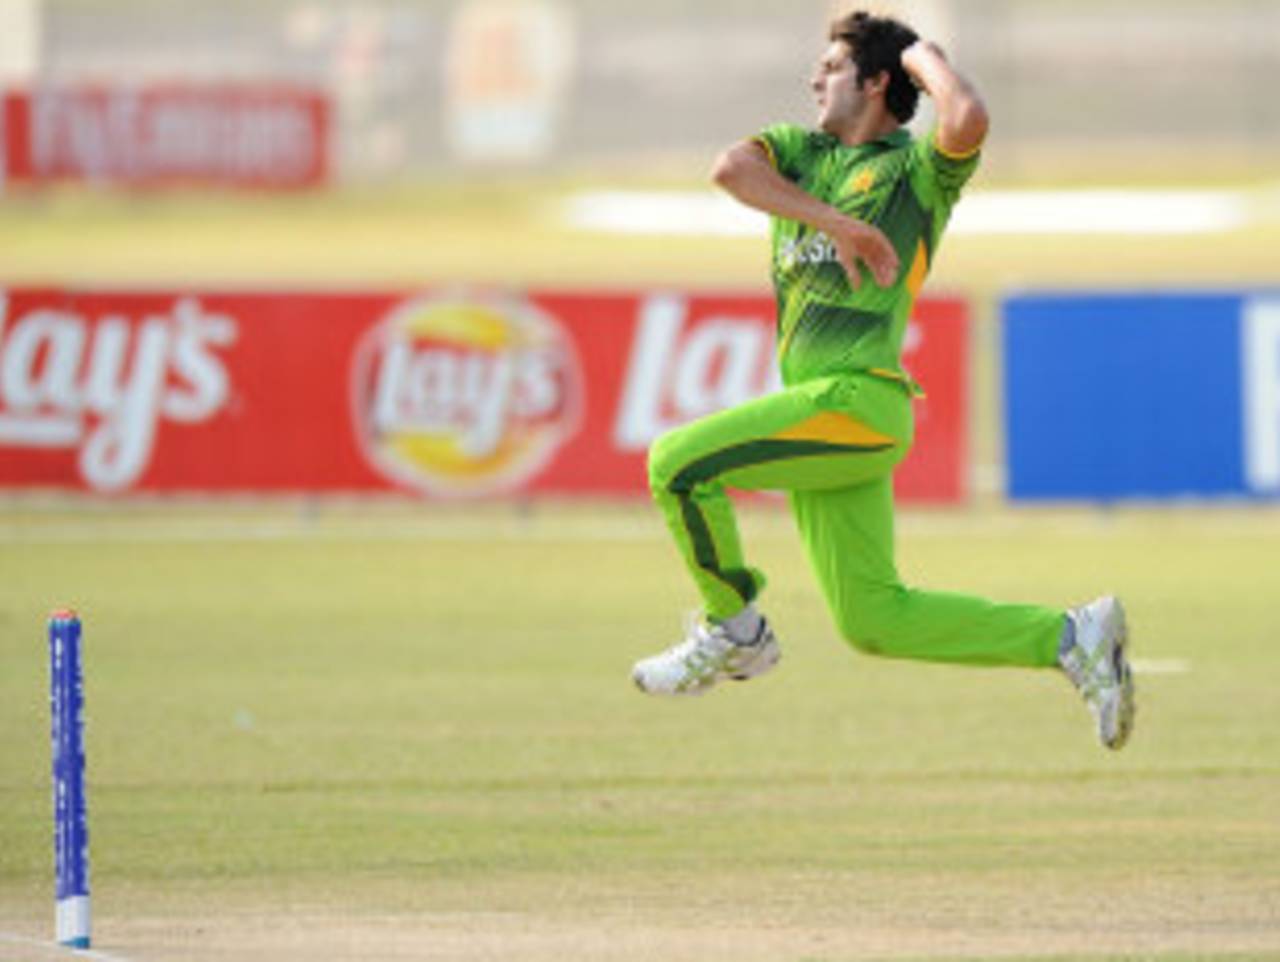 Mir Hamza was the pick of the Pakistan bowlers with 3 for 44, Pakistan v West Indies, ICC Under-19 World Cup 5th place play-off semi-final, Townsville, August 22, 2012